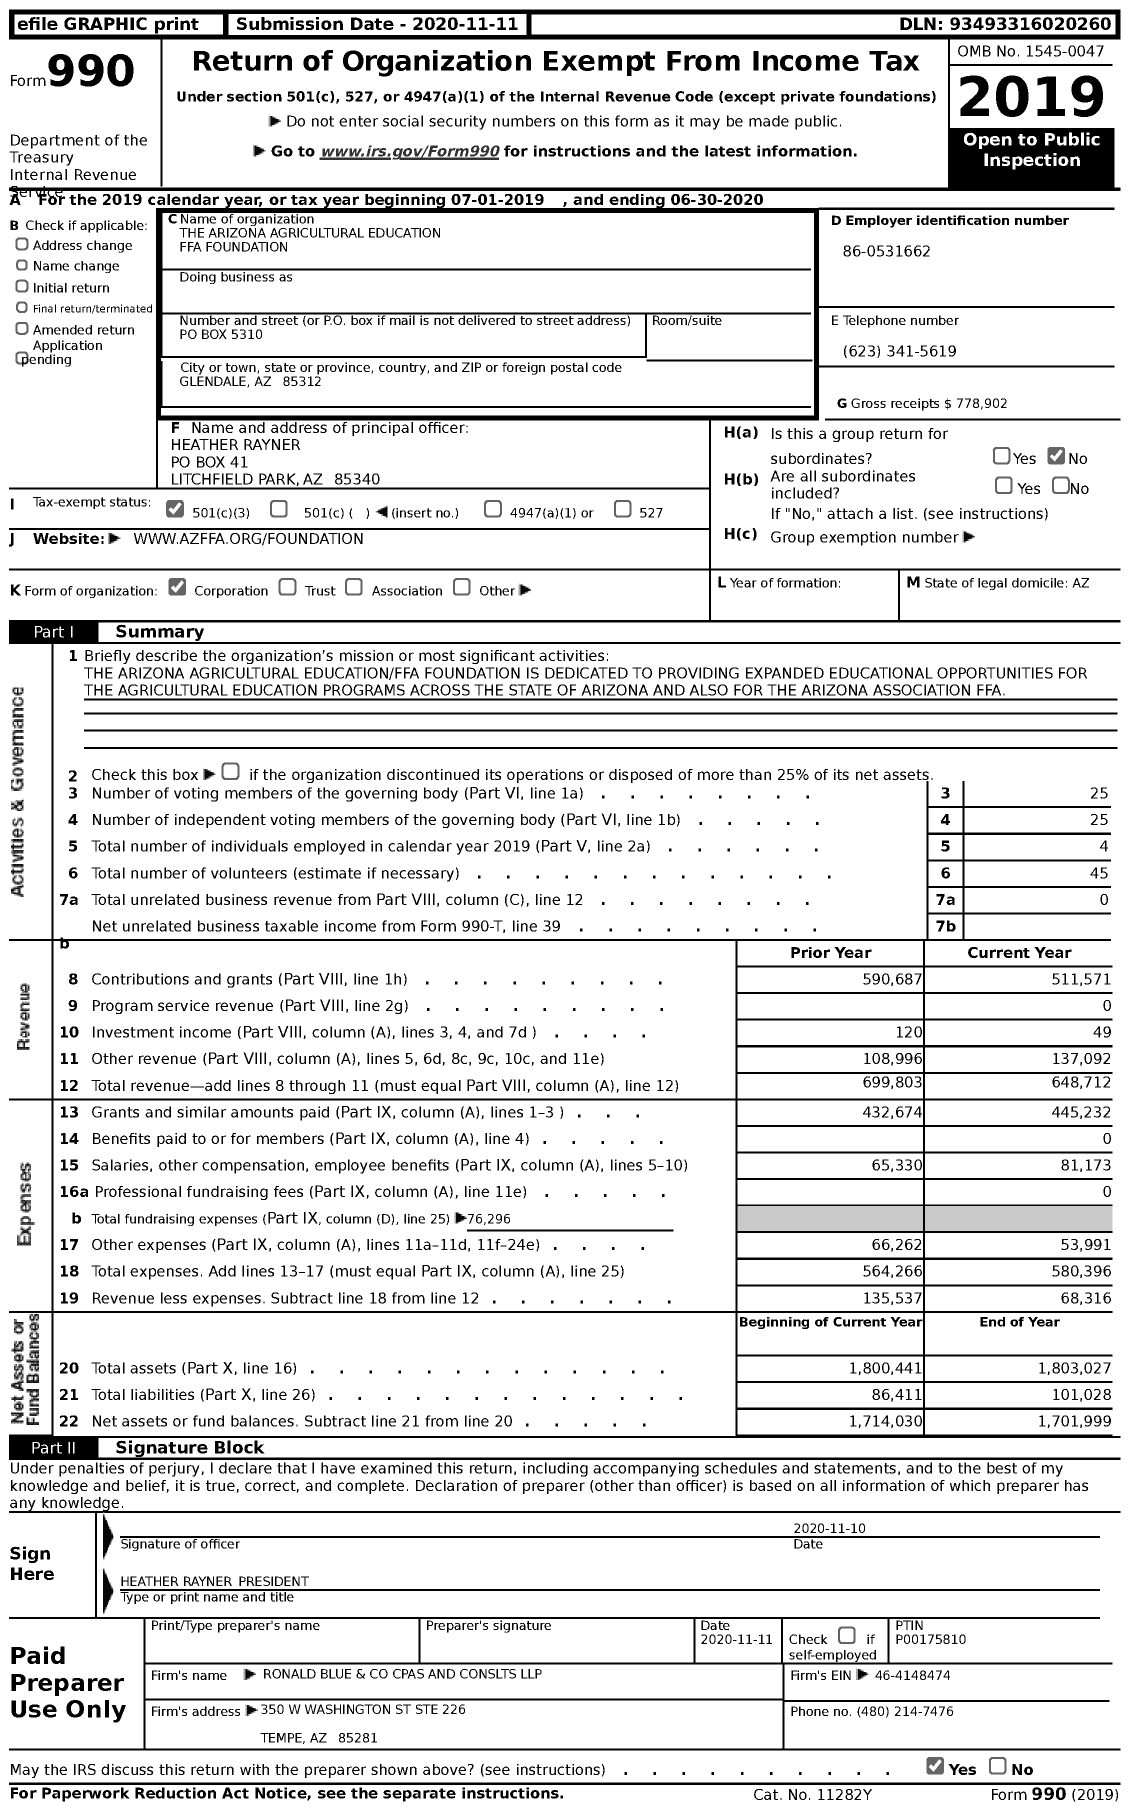 Image of first page of 2019 Form 990 for The Arizona Agricultural Education Ffa Foundation